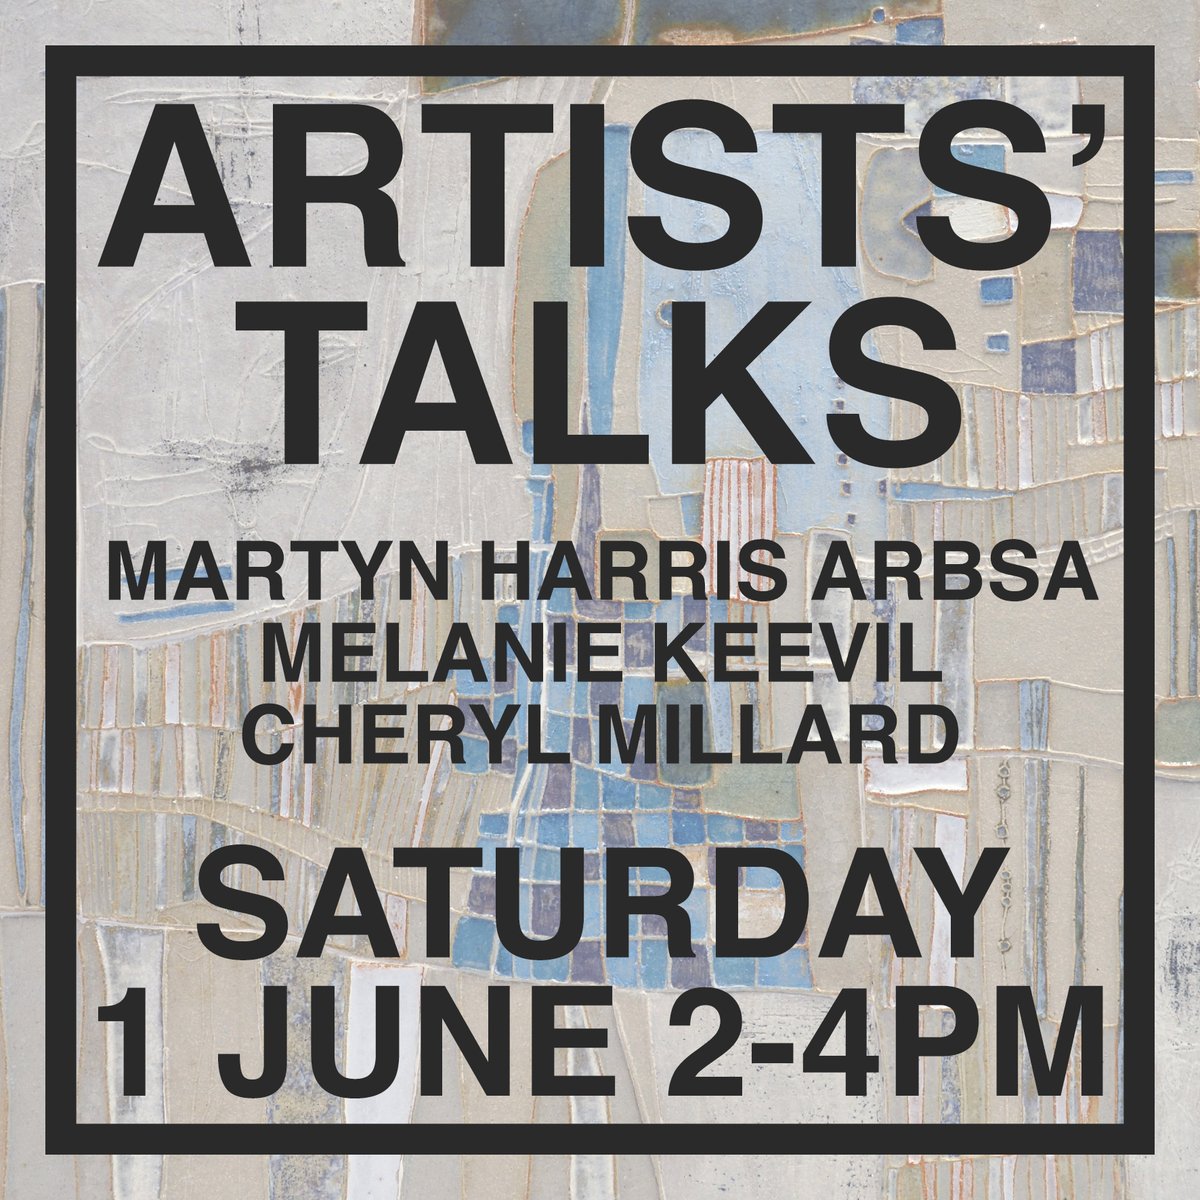 This Saturday, we have a jam packed schedule of artists' talks for you!

Join us in Gallery 2 from 2pm for a talk from portrait artist Martin Harris ARBSA which will be followed by Melanie Keevil and Cheryl Millard in Gallery 1 talking about their exhibition Nature and Nurture.